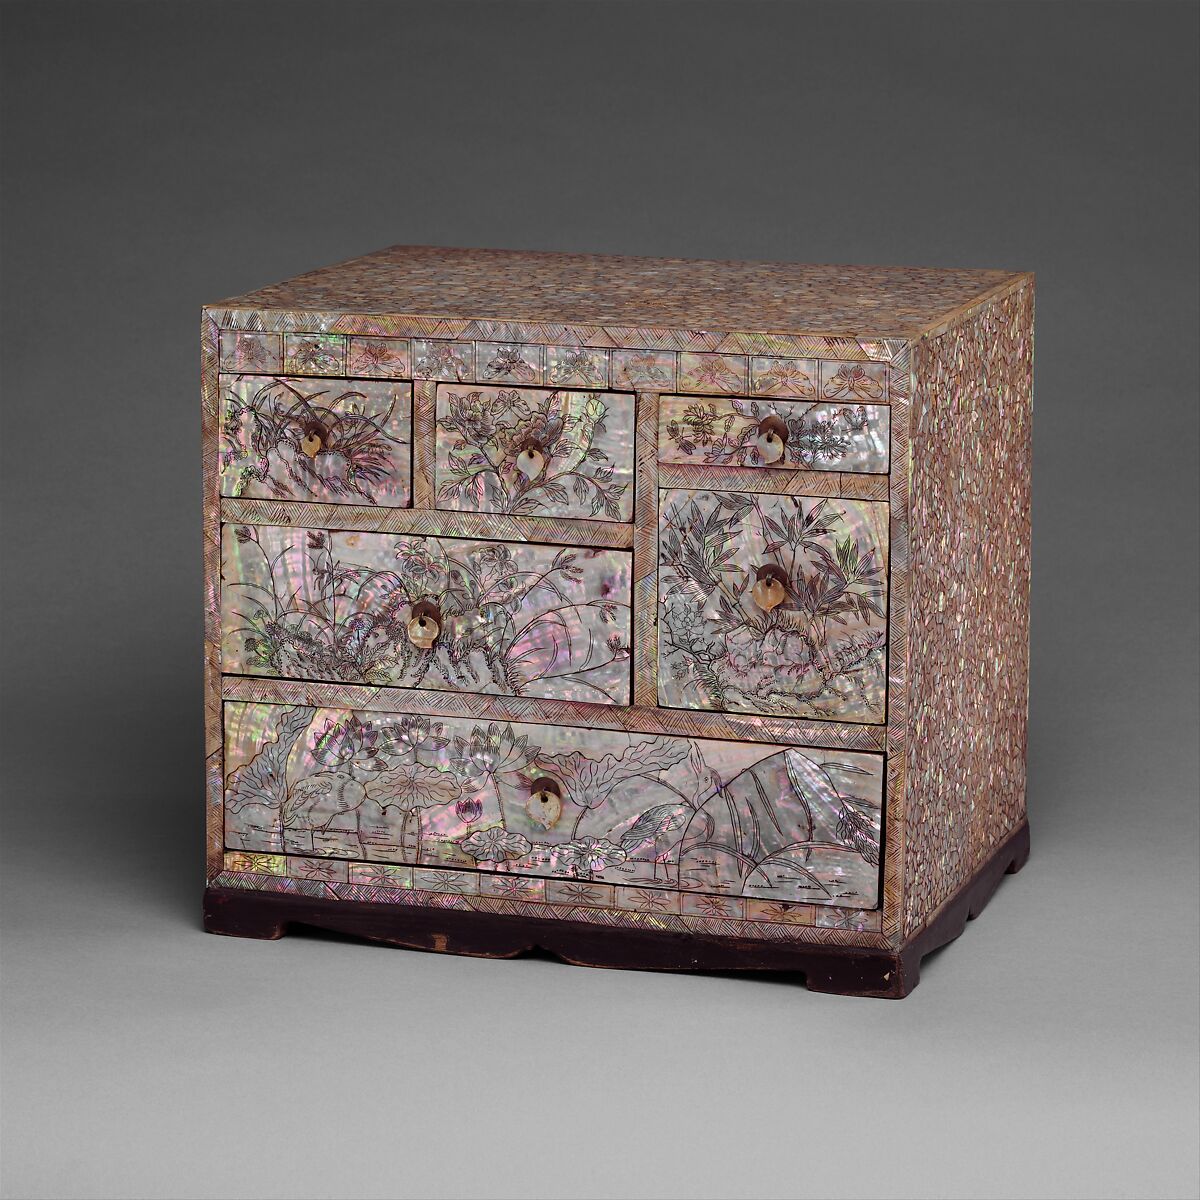 Small chest of drawers decorated with flowers, birds, and insects, Lacquer inlaid with mother-of-pearl, with incised design, Korea 